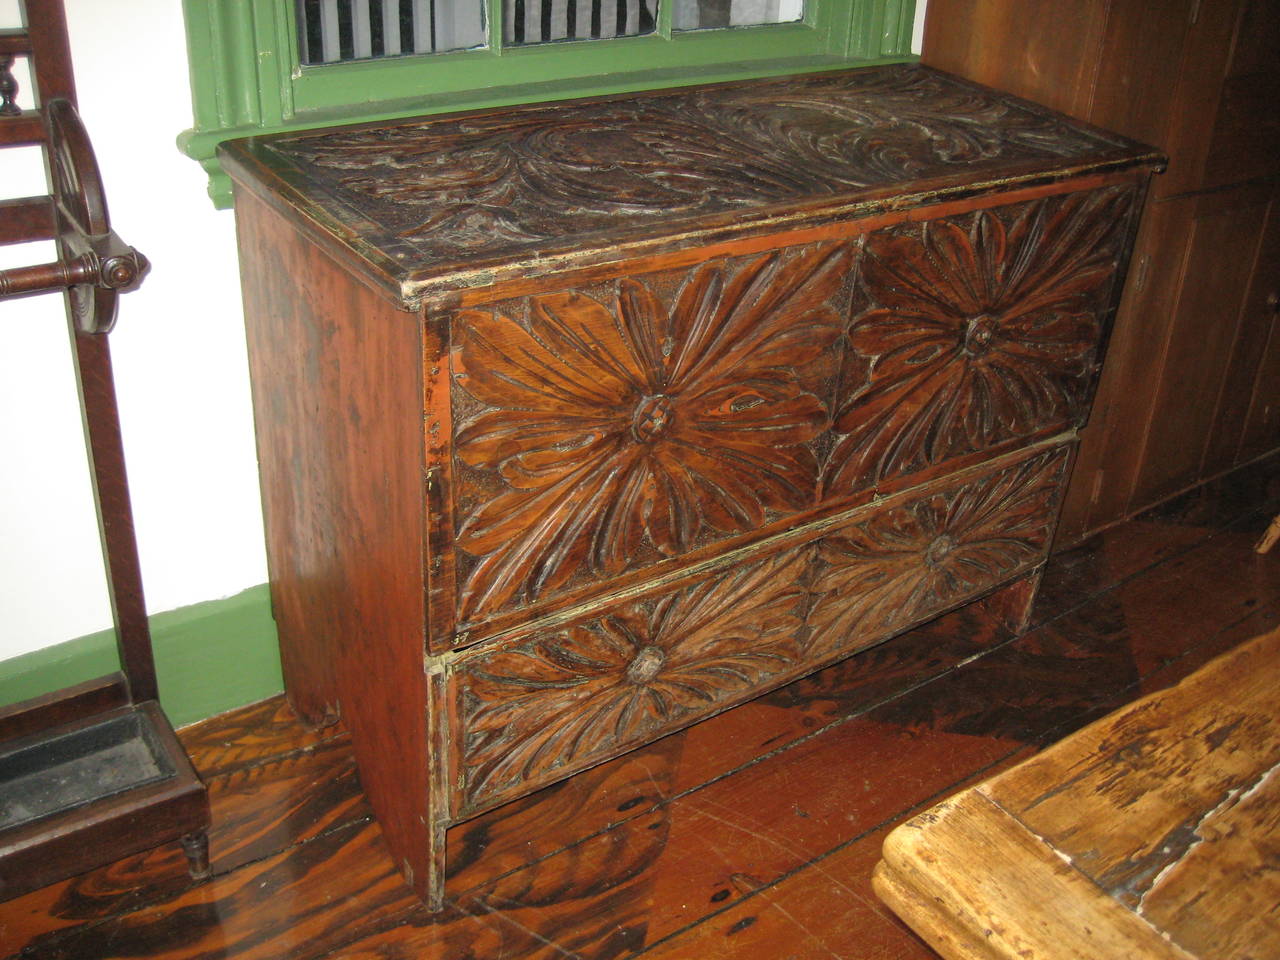 Mule chest with relief carving, tulip and acanthus leaf motif.